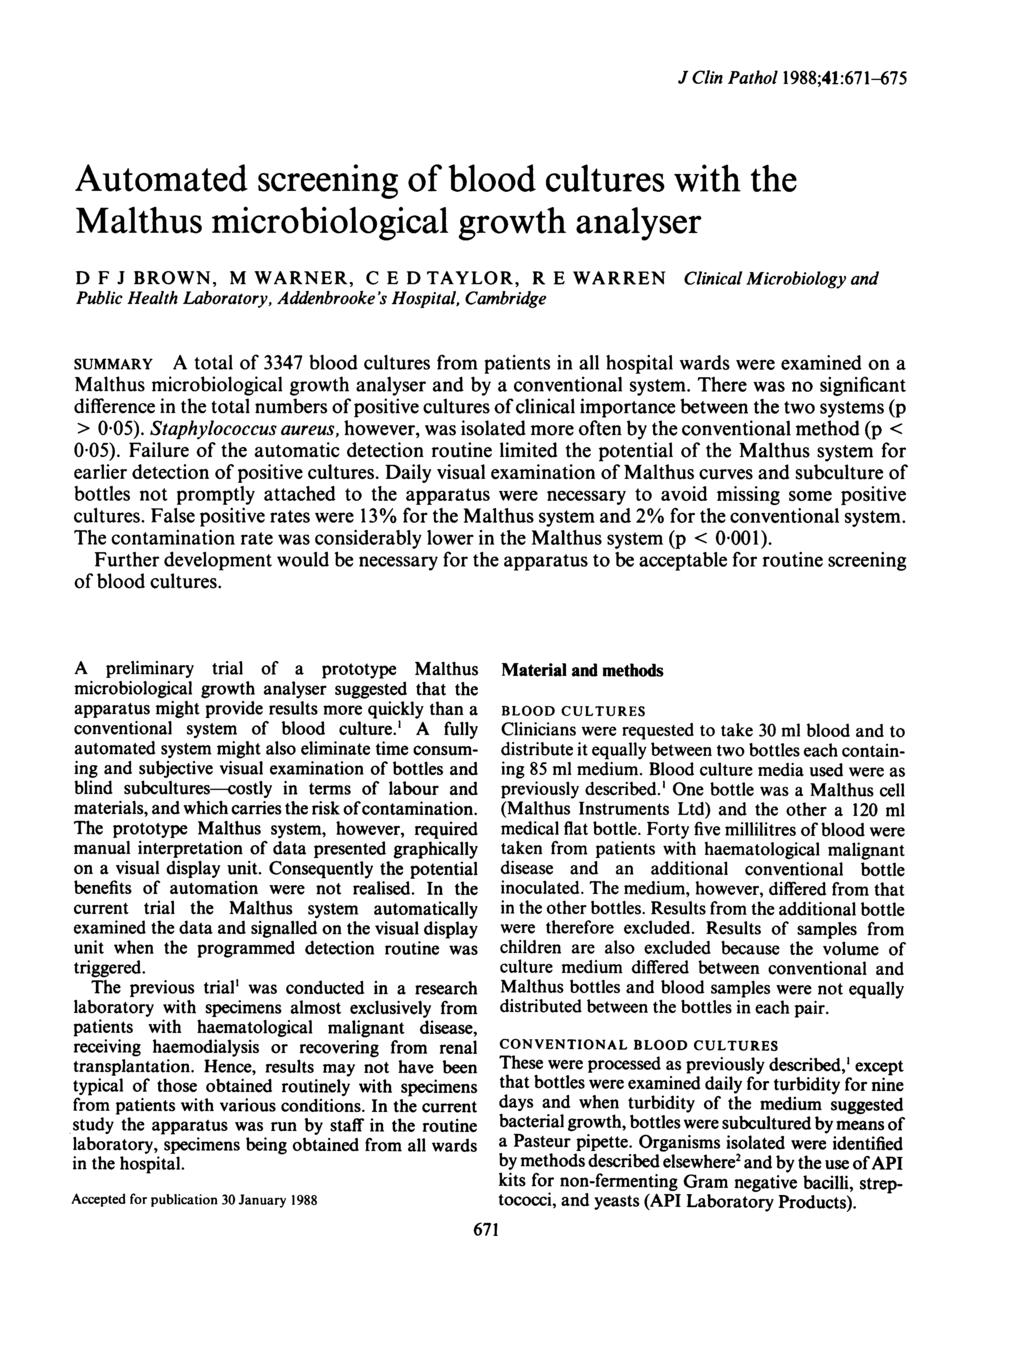 J Clin Pathol 1988;41:671-675 Automated screening of blood cultures with the Malthus microbiological growth analyser D F J BROWN, M WARNER, C E D TAYLOR, R E WARREN Clinical Microbiology and Public